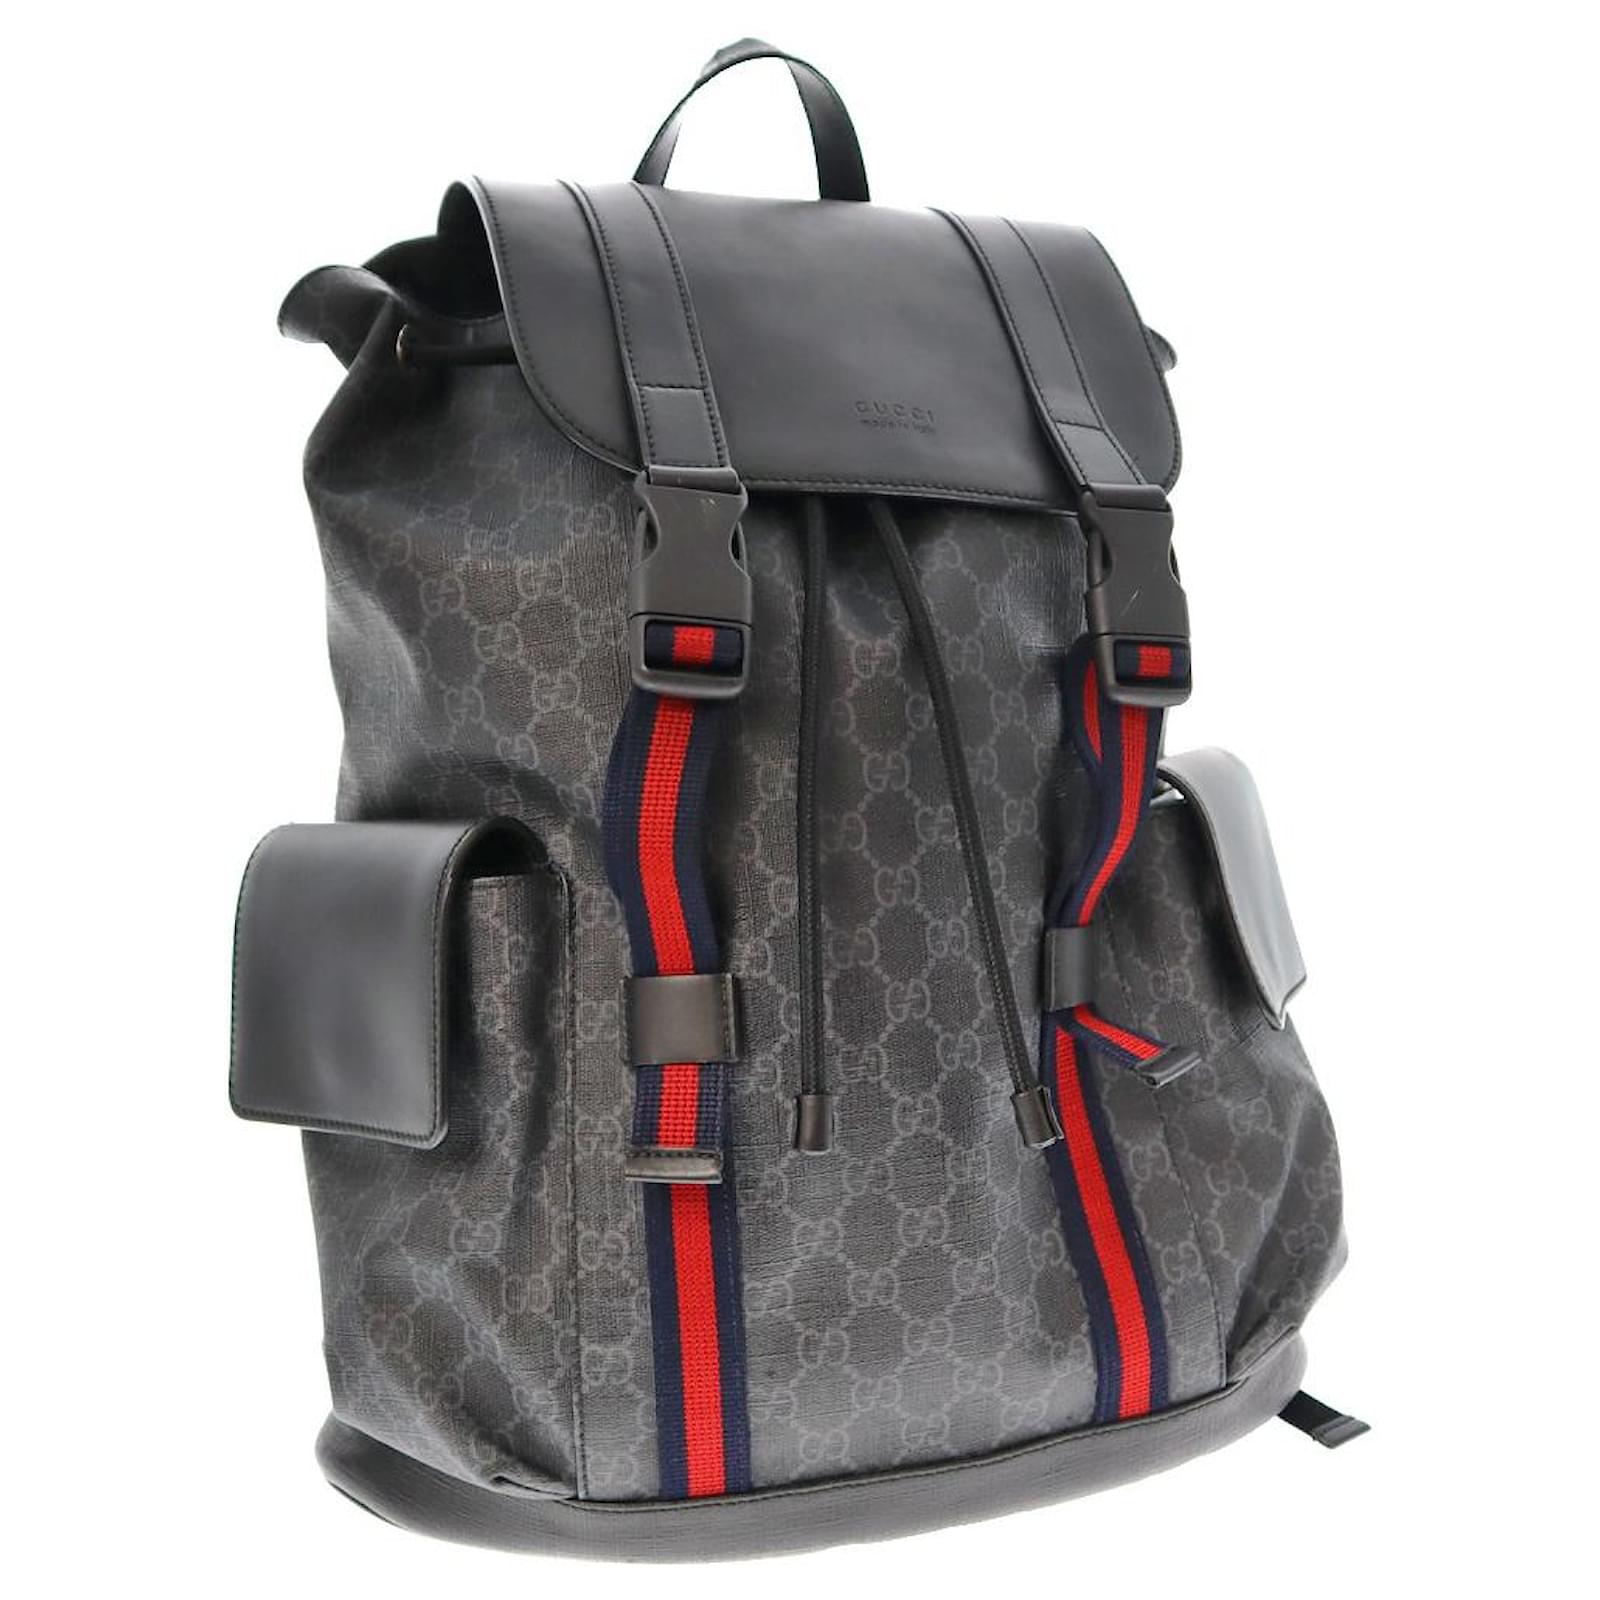 GG Supreme Canvas Backpack in Grey - Gucci